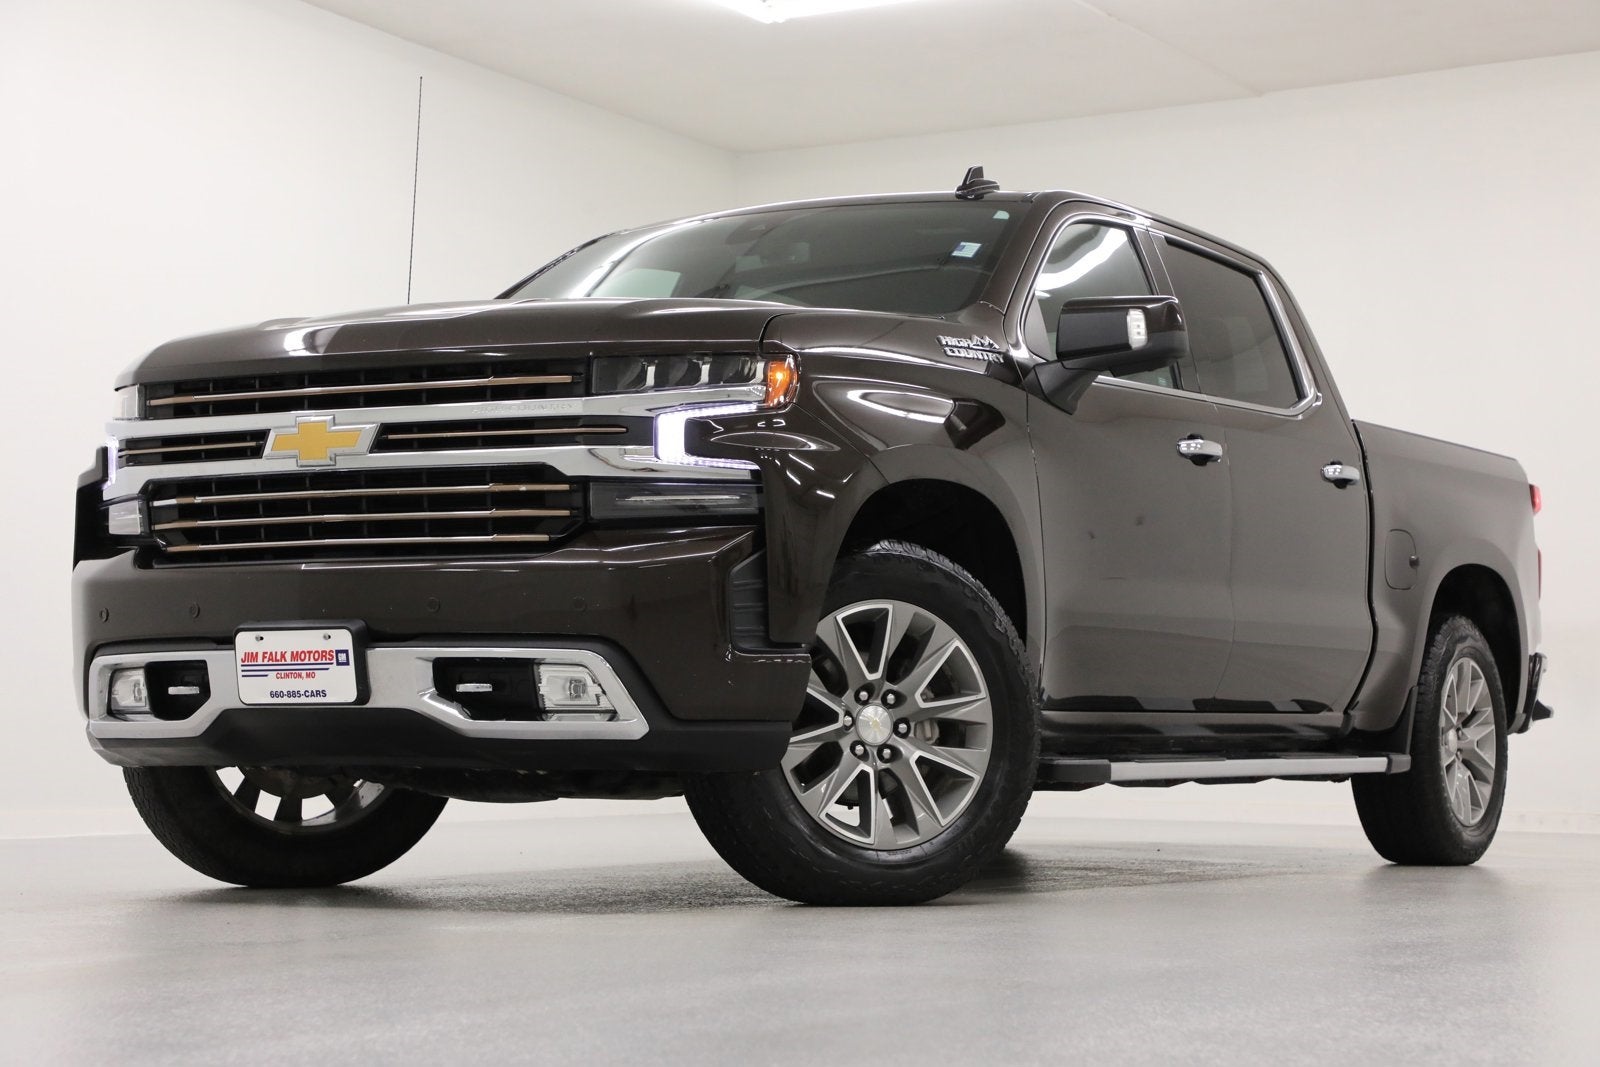 2019 Chevrolet Silverado 1500 Crew Cab High Country Z71 4WD 6.2L V8 Heated Cooled Black Leather Heated Rear Seats Power Tailgate